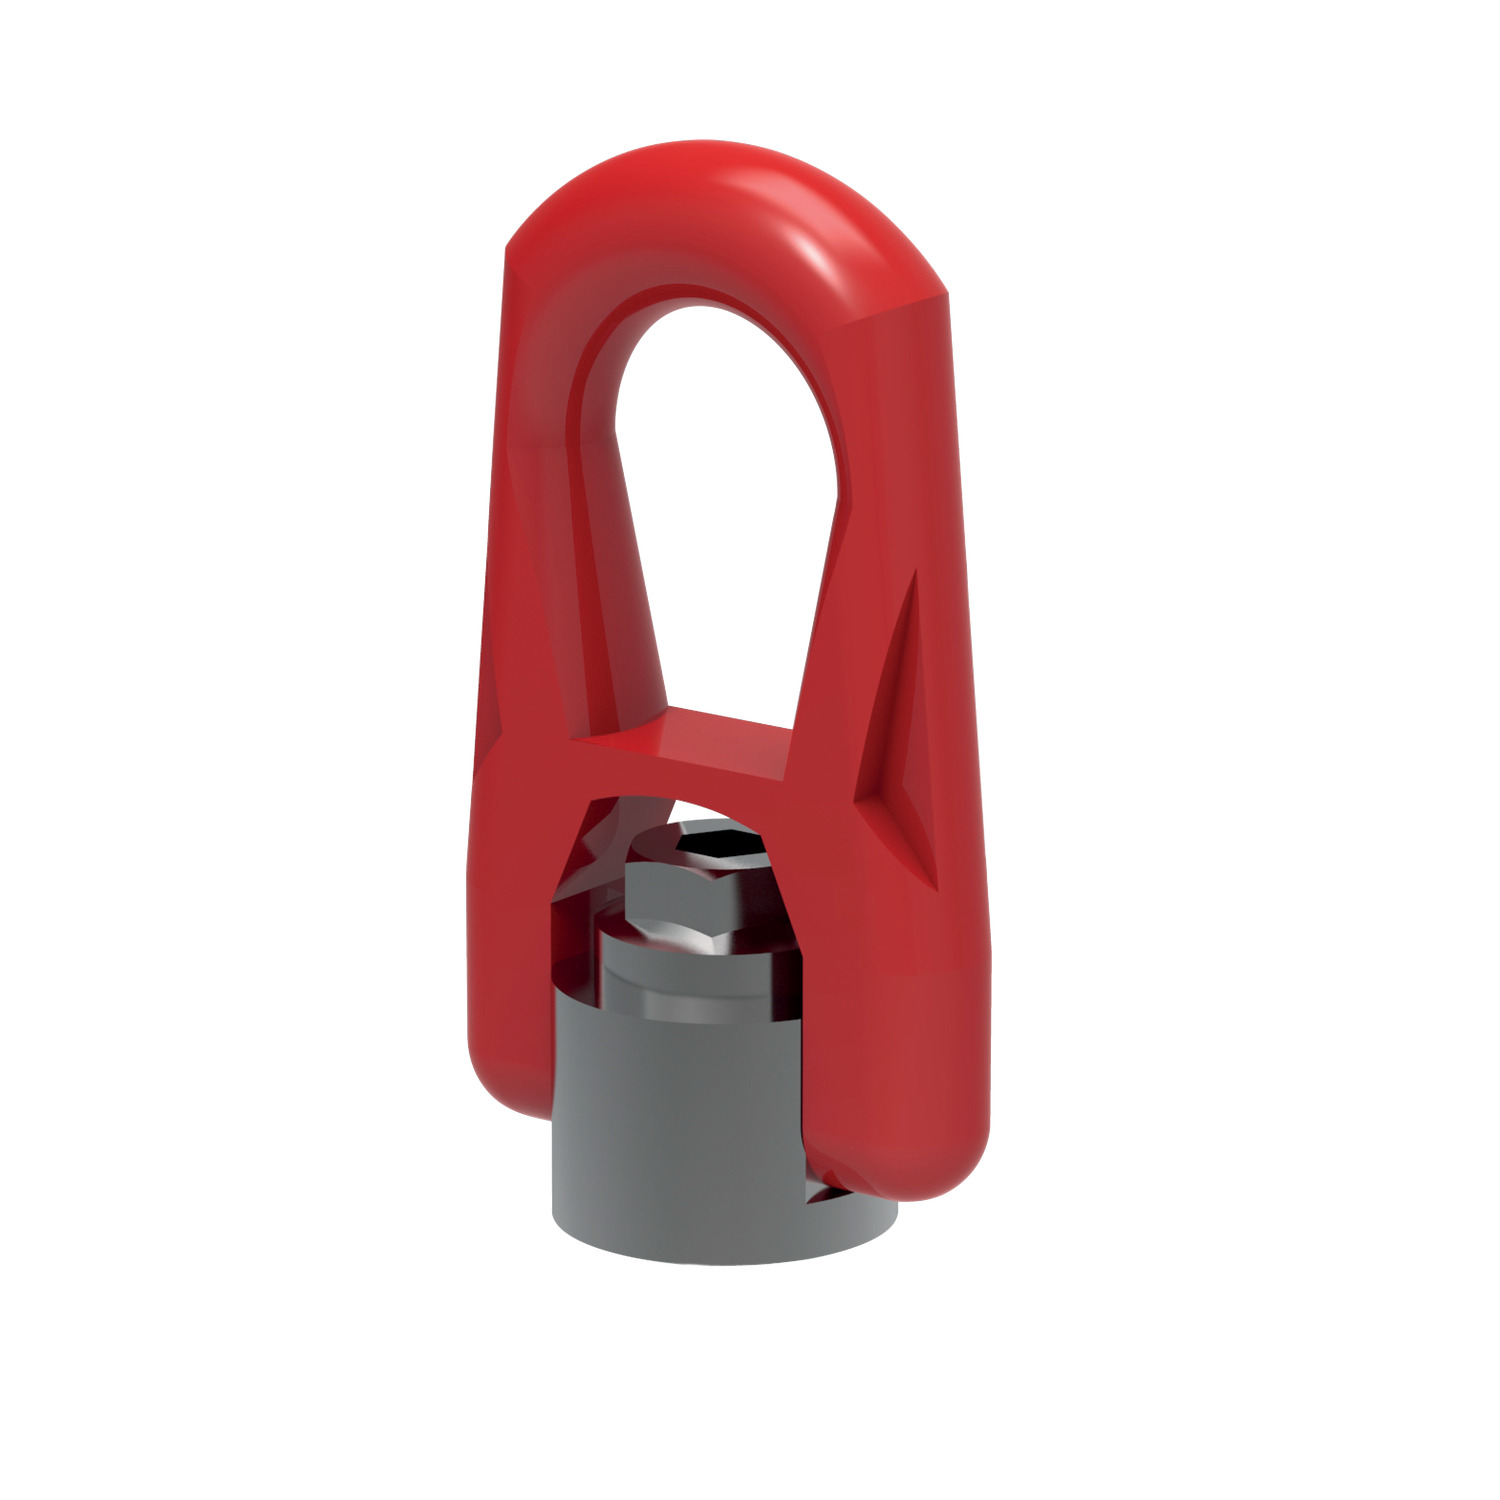 Double Swivel Nuts Female Female double swivel lifting ring with coarse and UNC threads available. Made from high tensile steel with a low overhang for improved safety. CE certificate supplied.